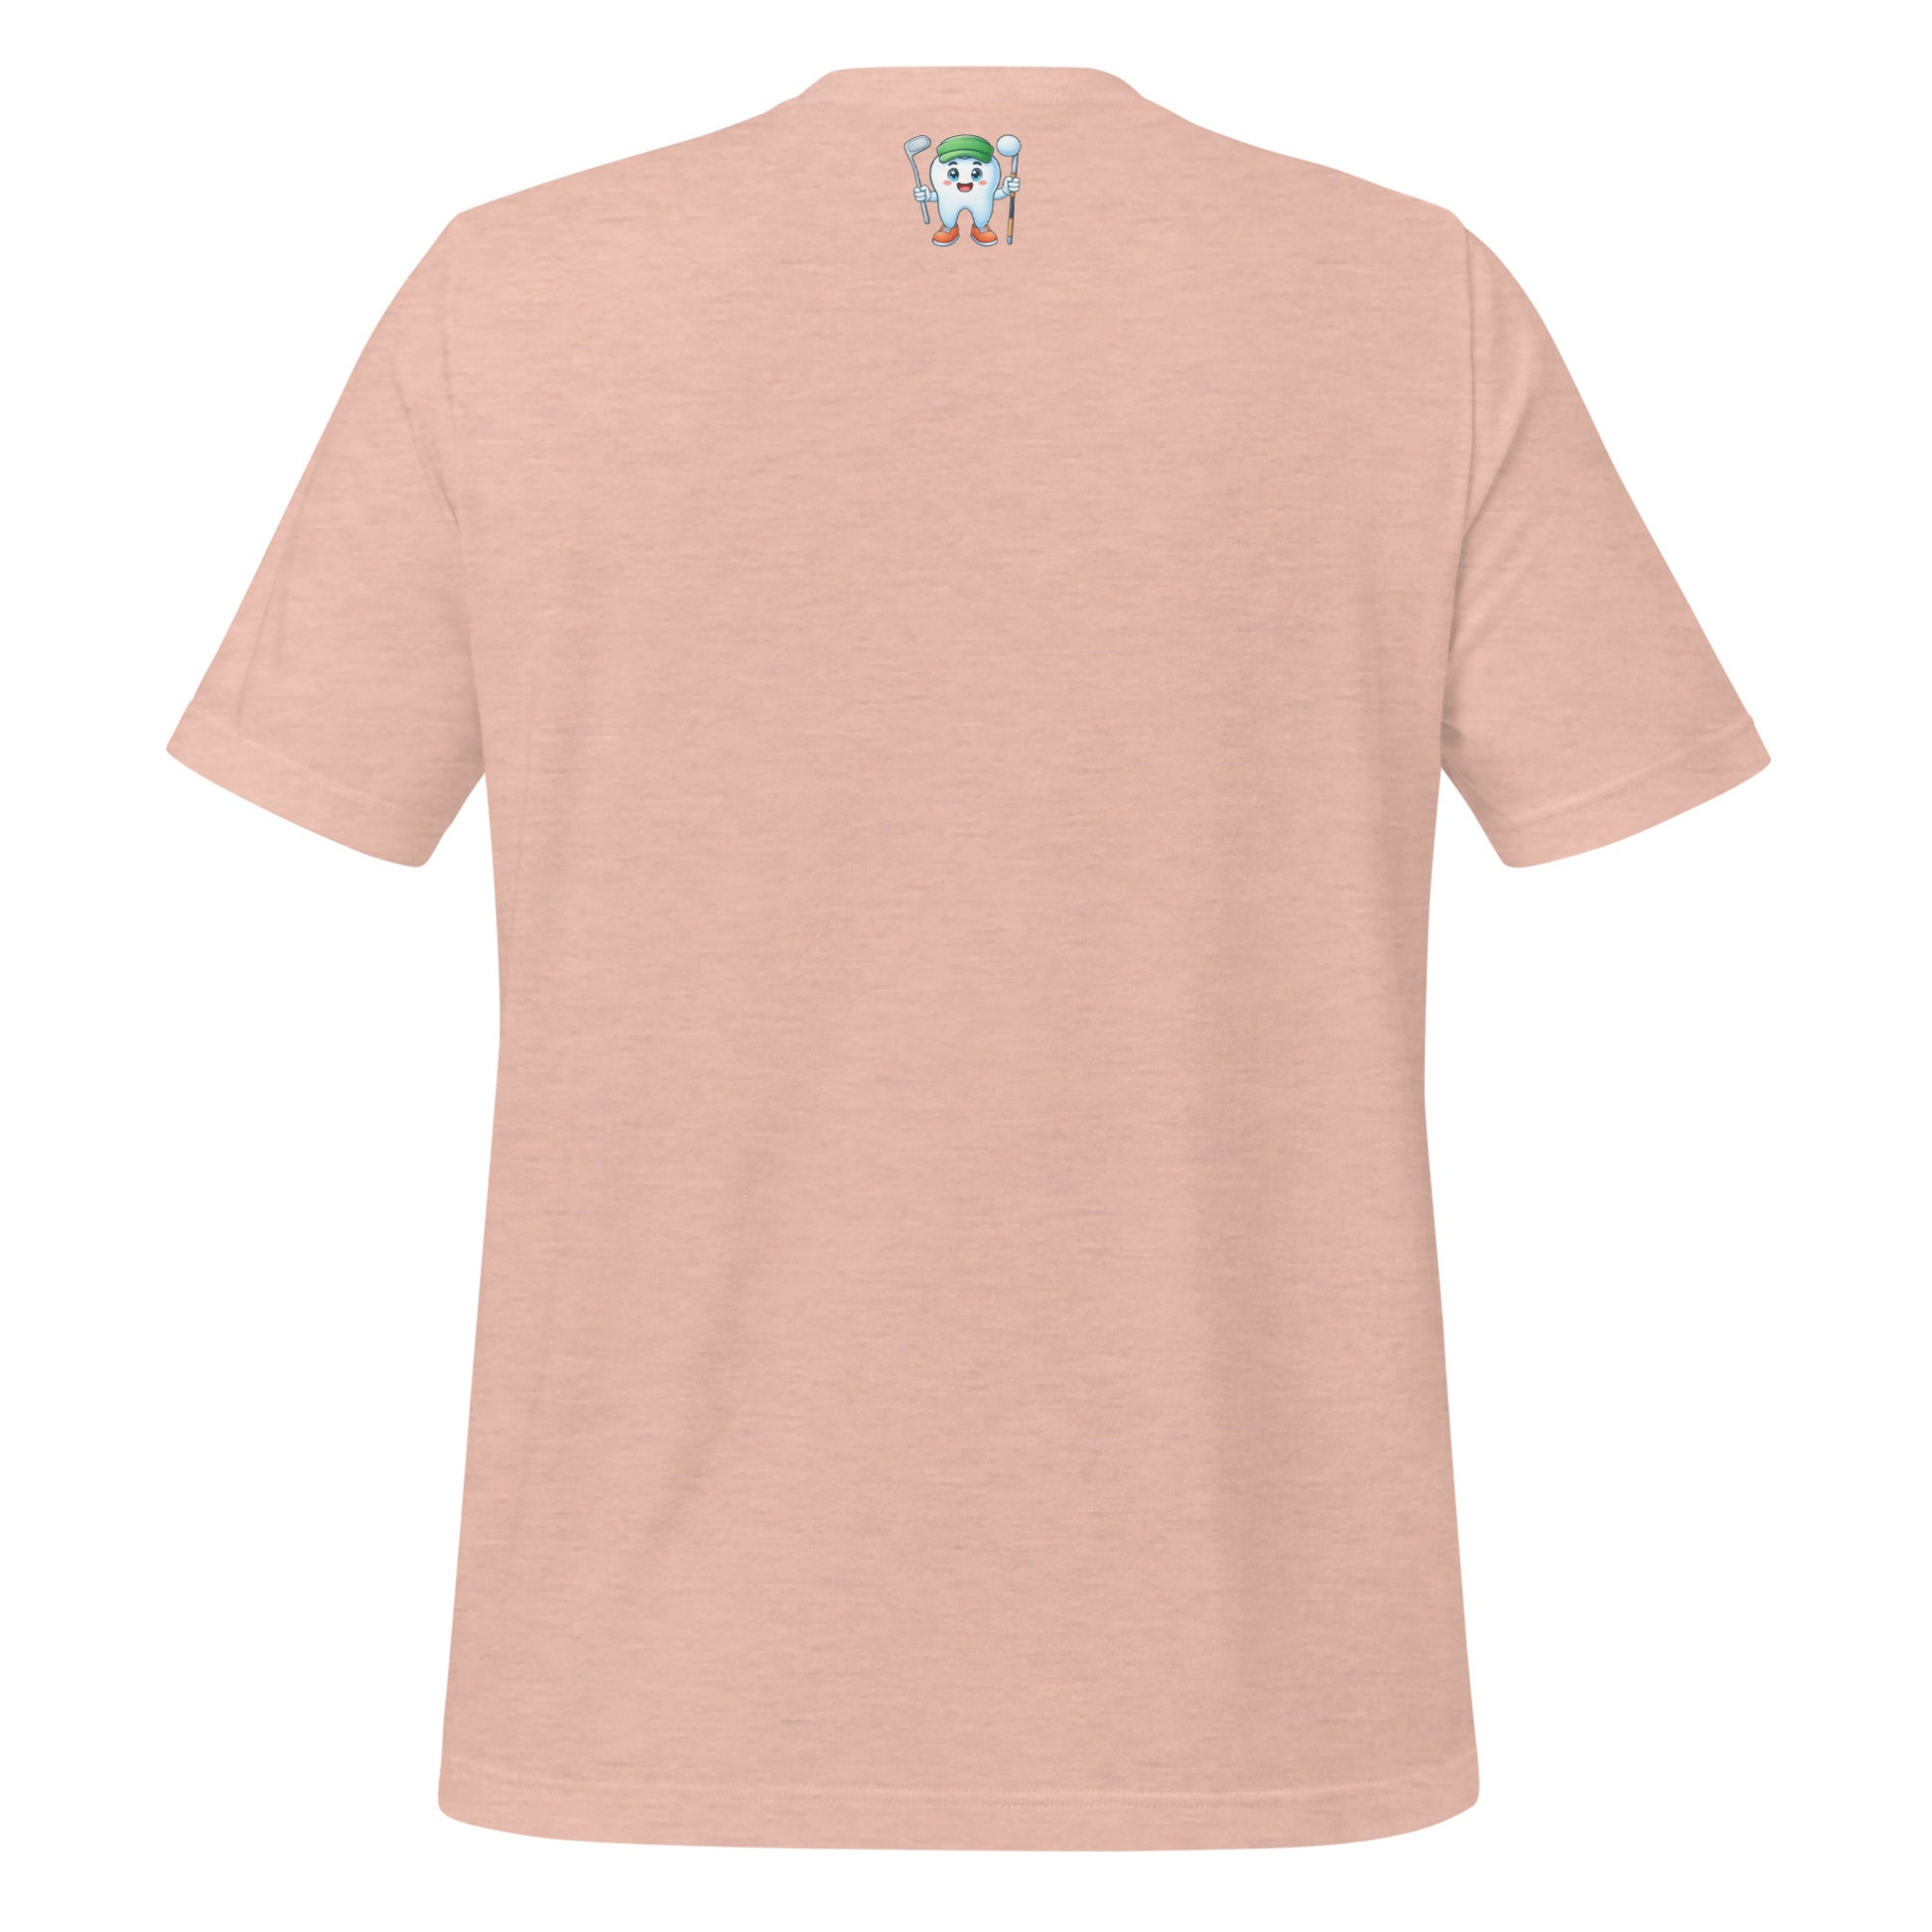 Cute dentist t-shirt showcasing an adorable tooth character in golf attire, joyfully celebrating a ‘hole in one’ achievement, perfect for dentist and dental professionals seeking unique and thematic dental apparel. Heather prism peach color, back view.